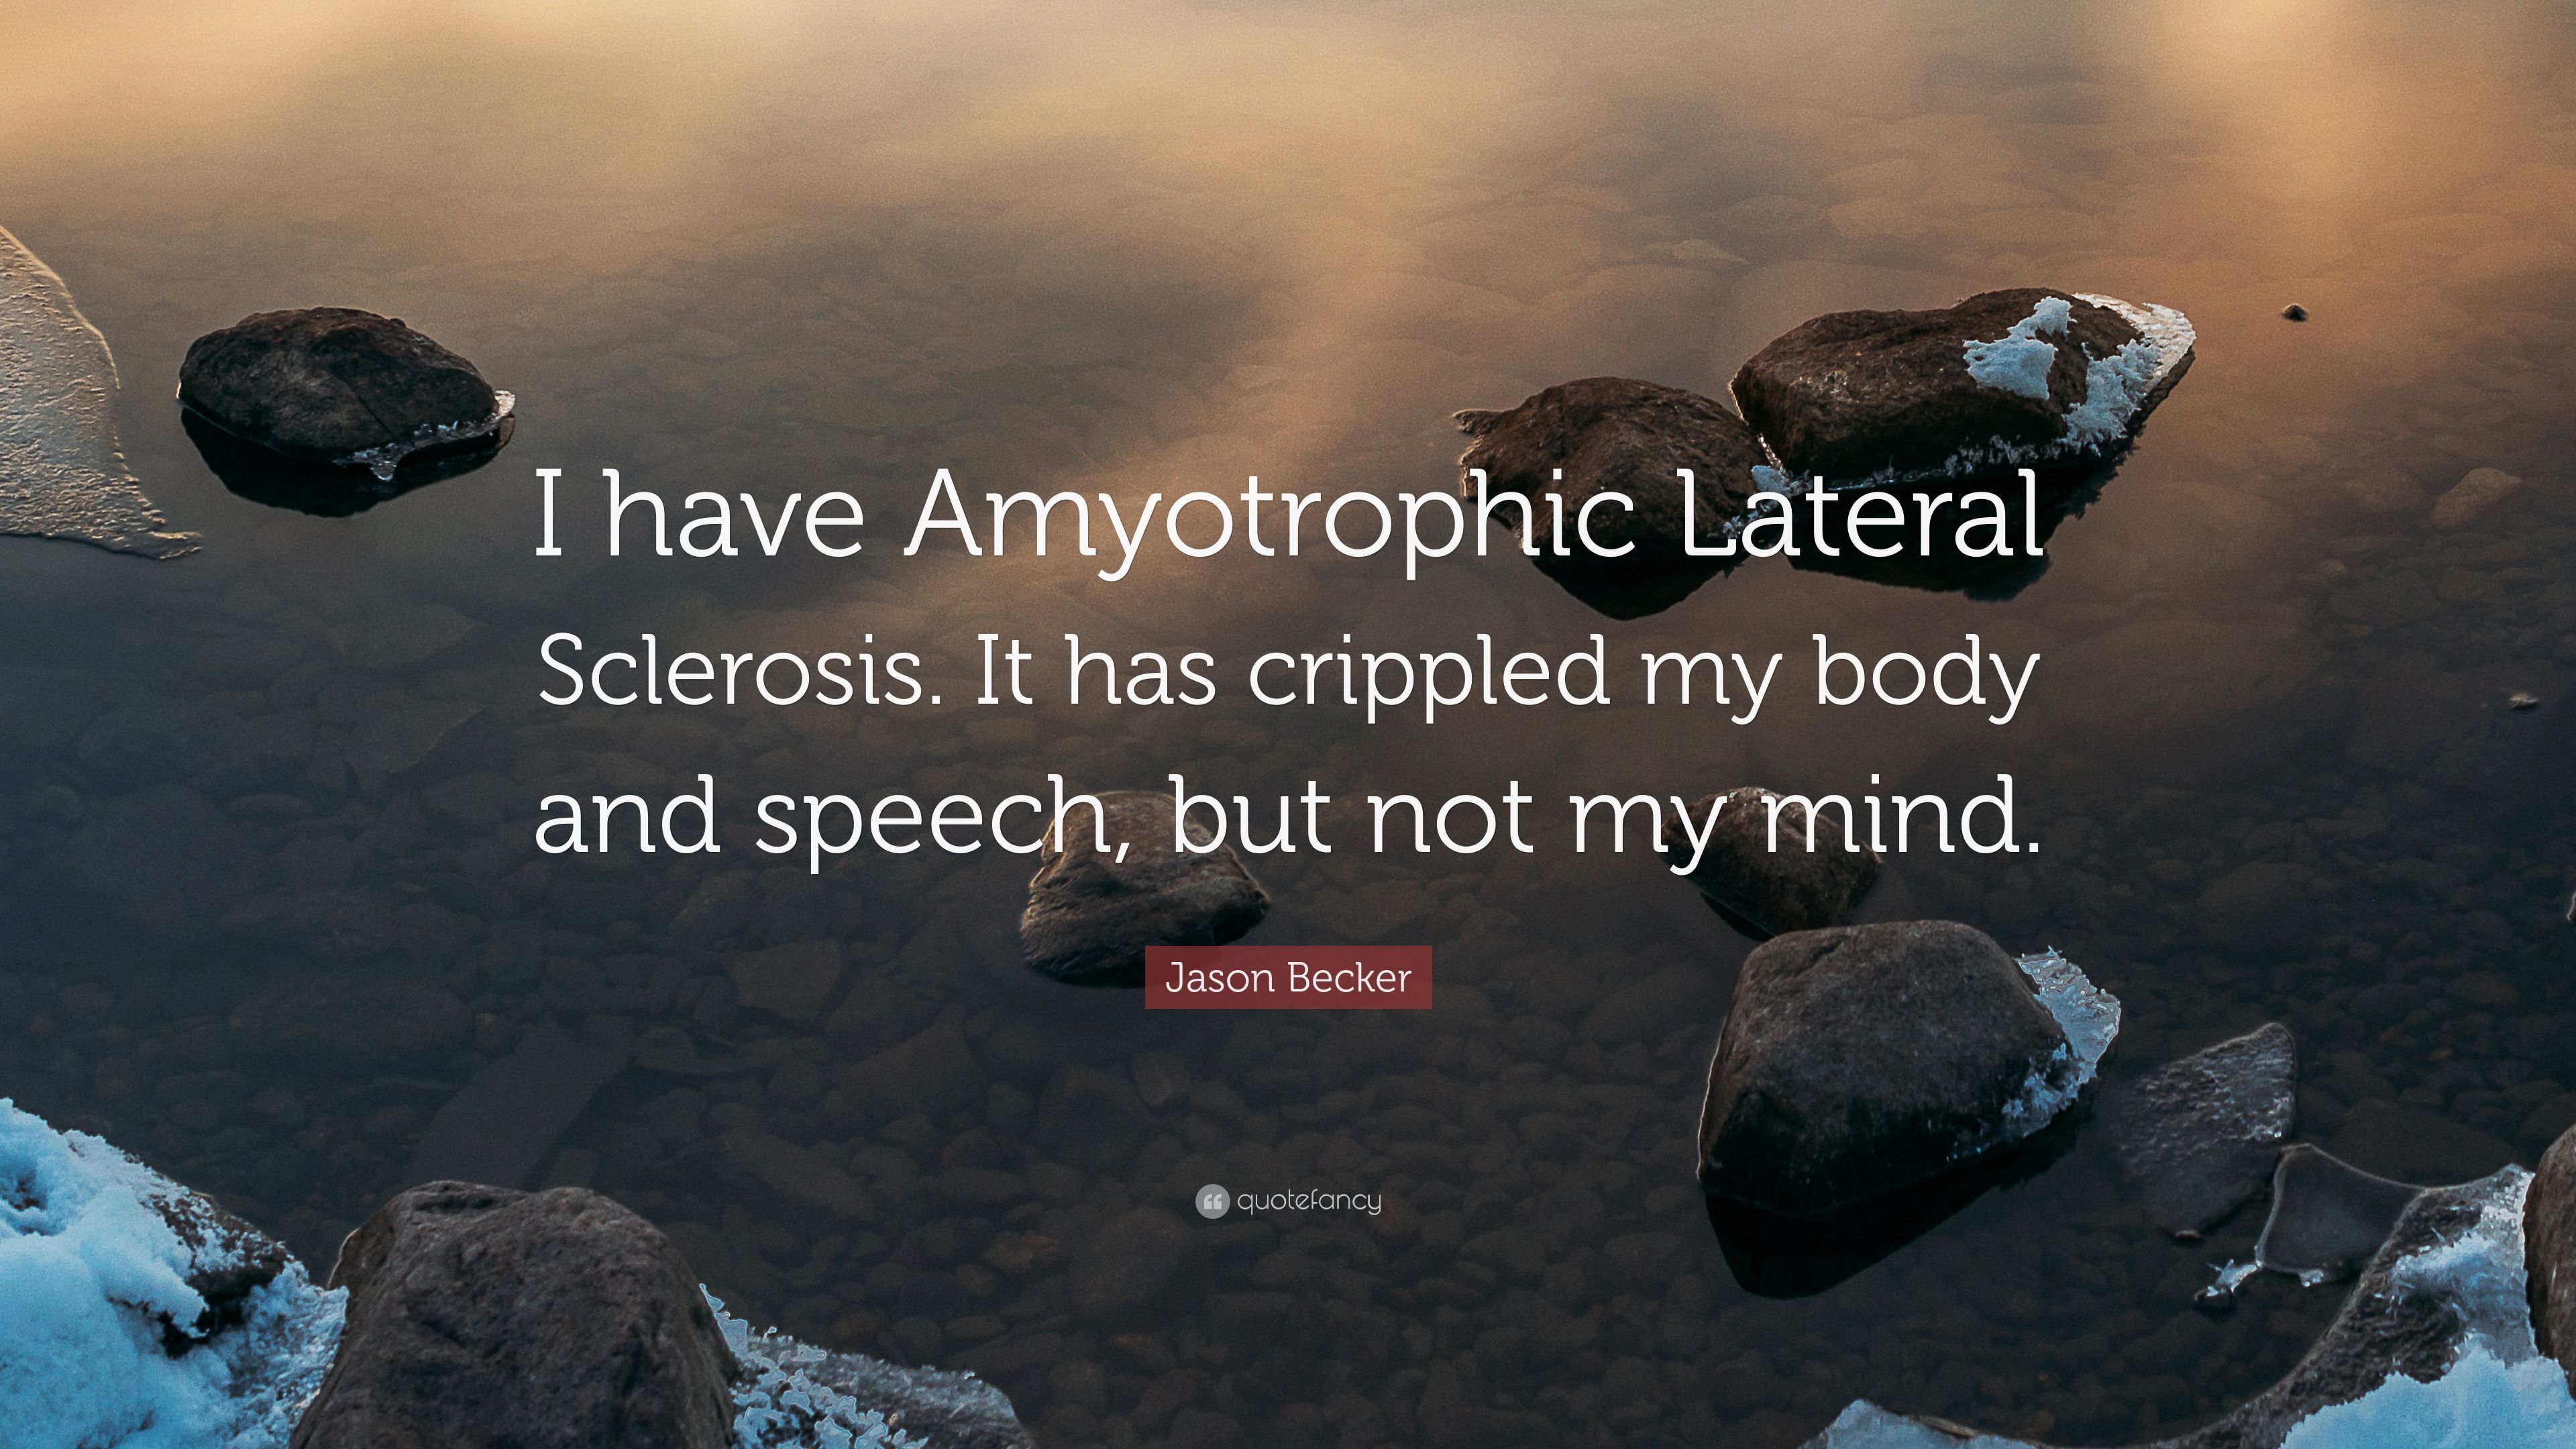 Jason Becker Quote: “I have Amyotrophic Lateral Sclerosis. It has